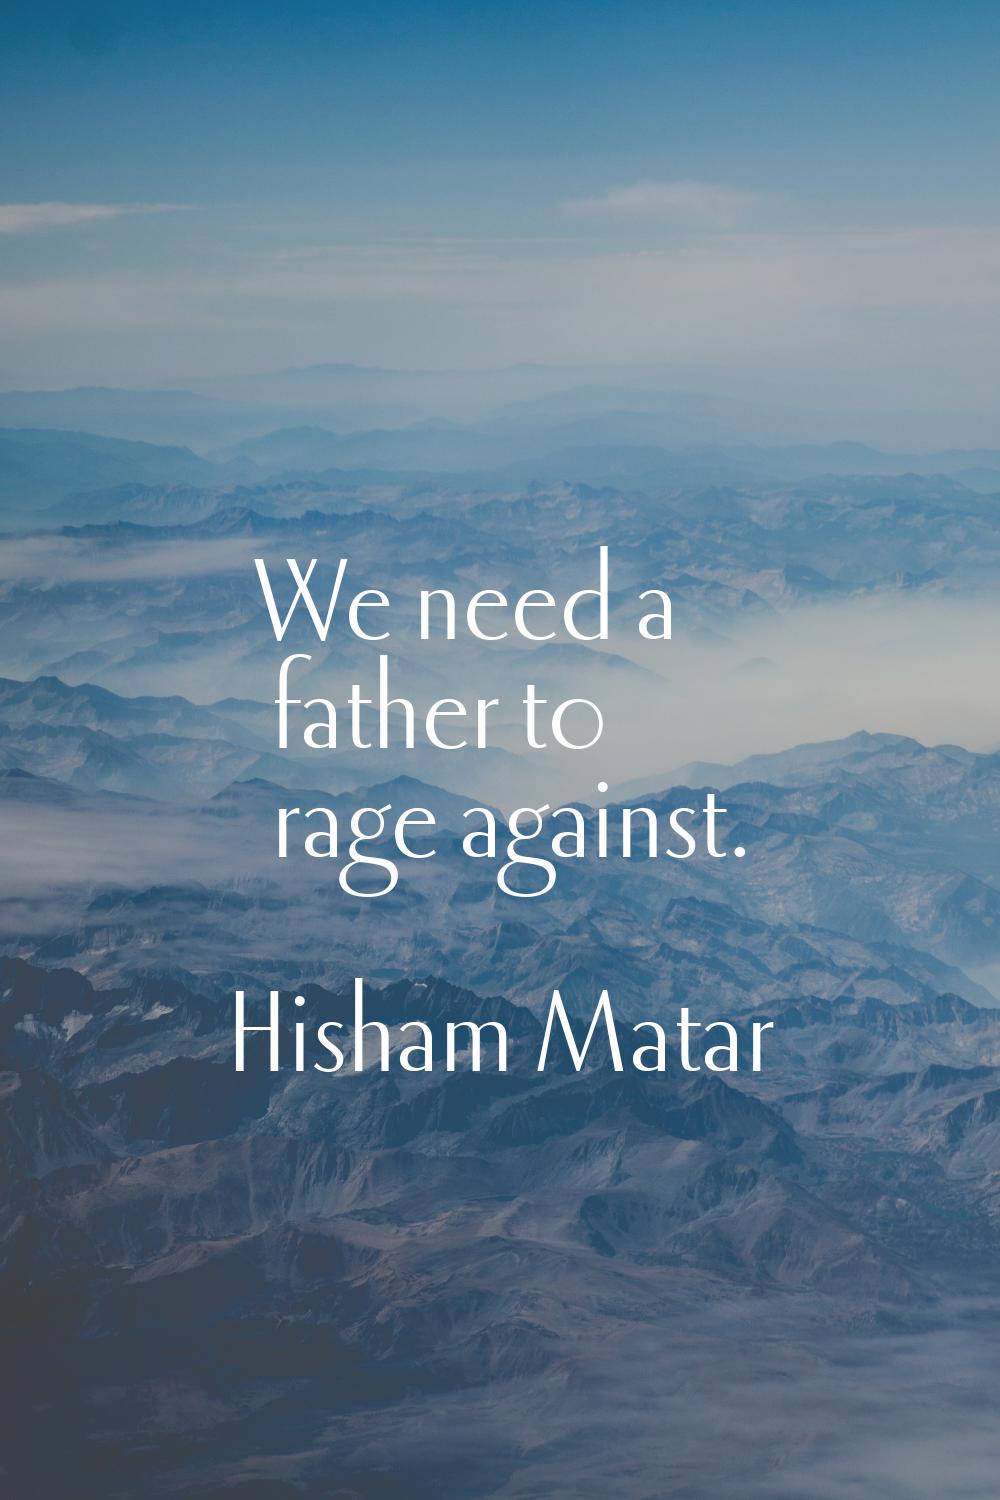 We need a father to rage against.